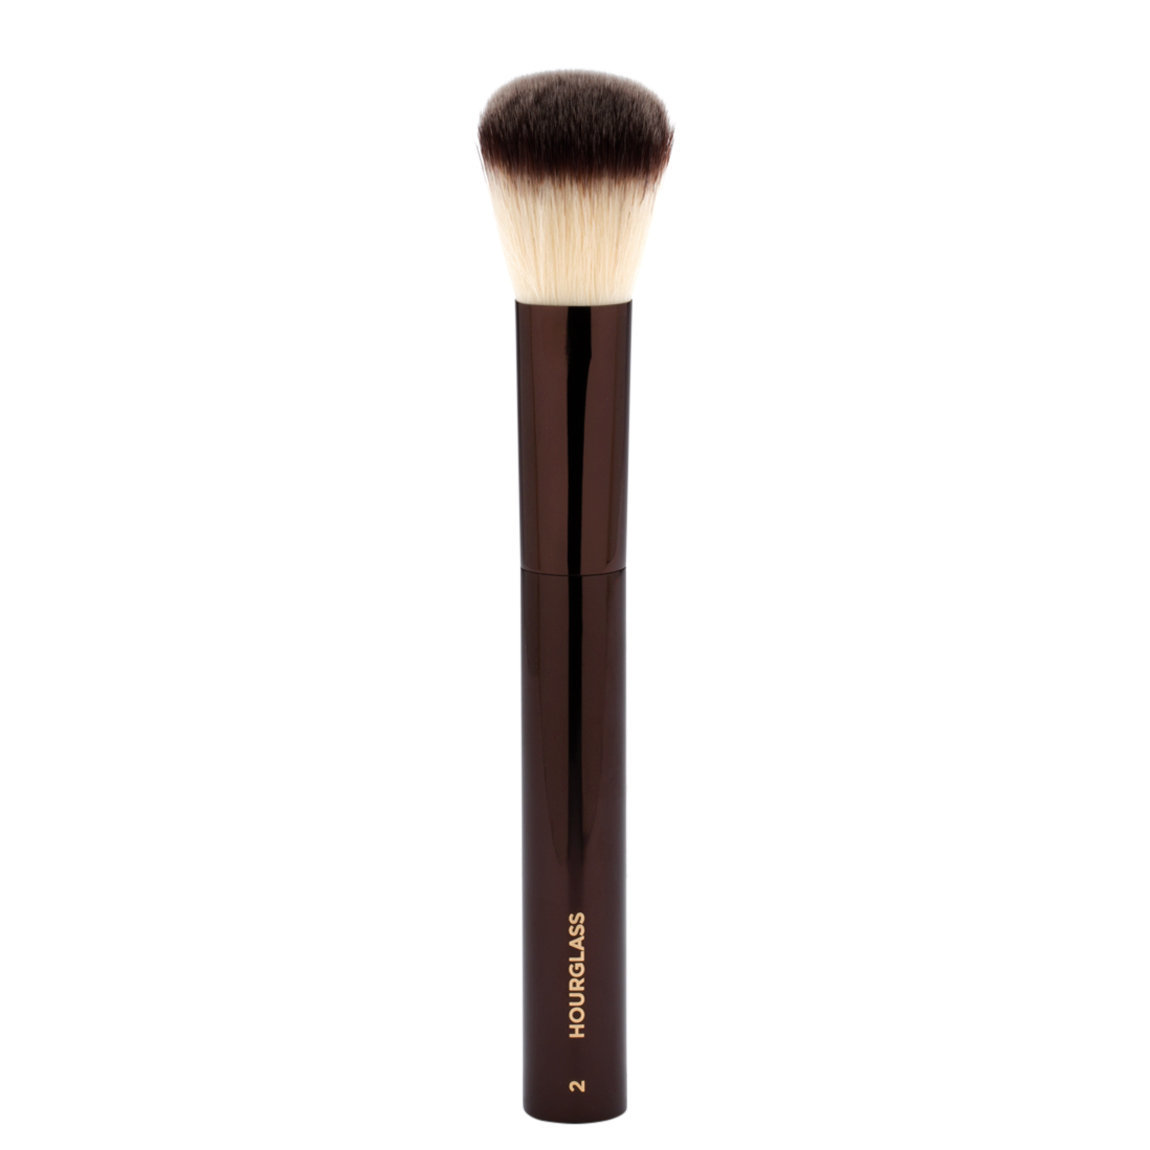 Hourglass N° 2 Foundation/Blush Brush alternative view 1 - product swatch.